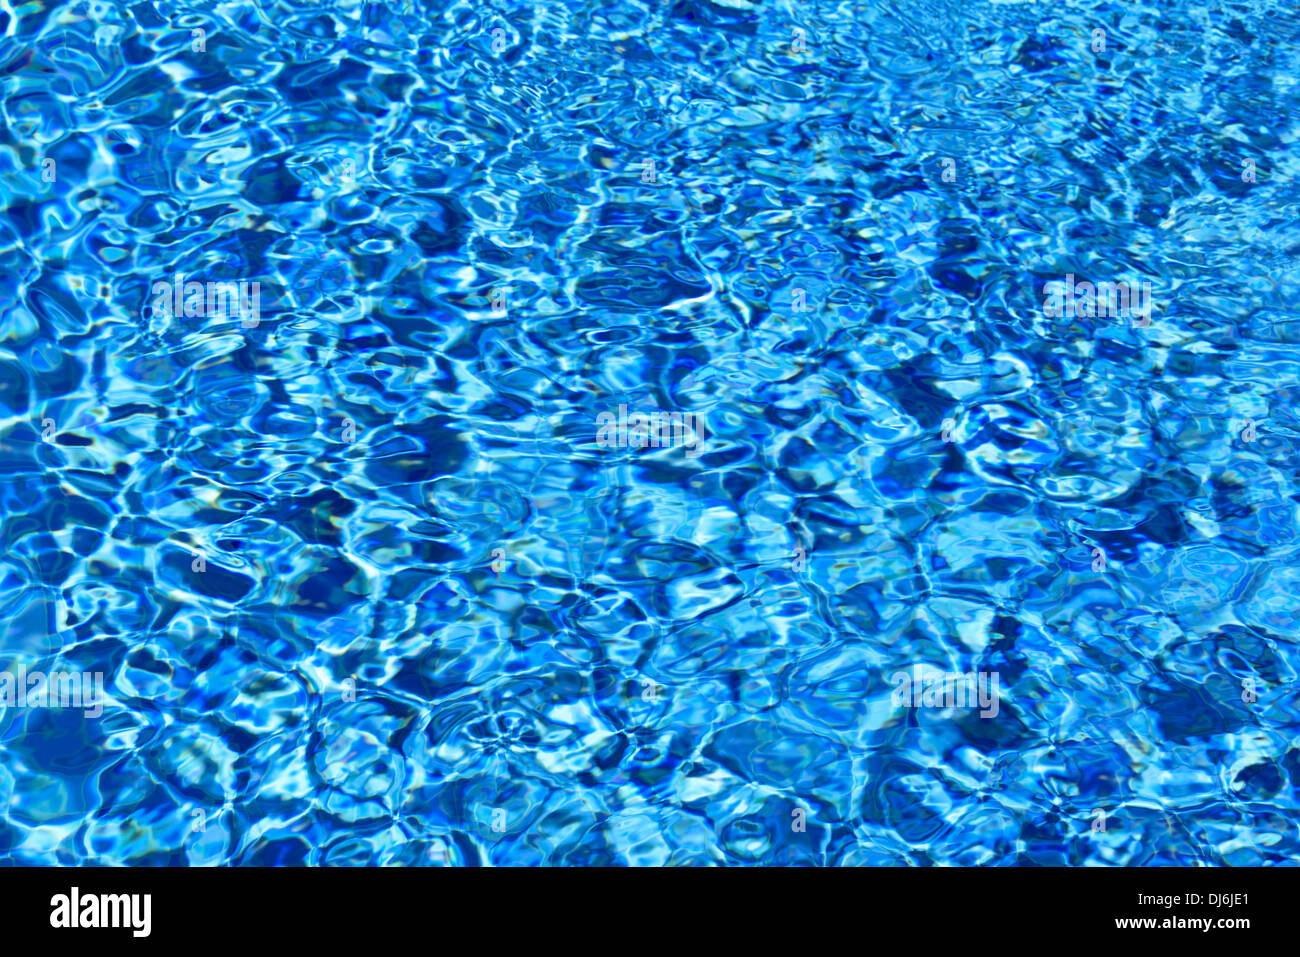 surface of waved blue water in a swimming pool, background image Stock Photo